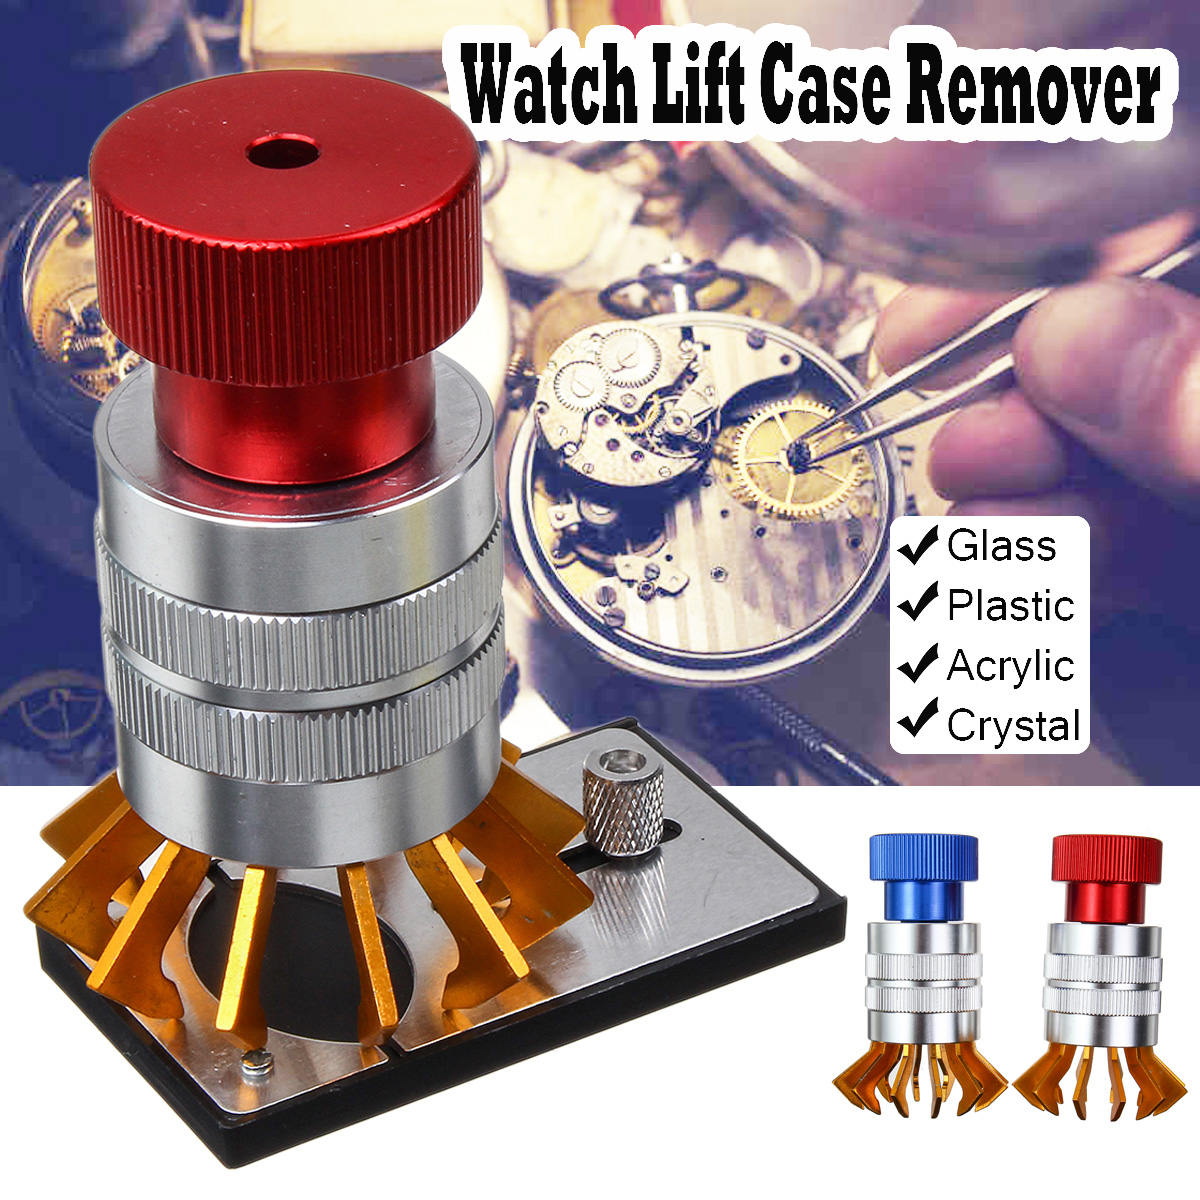 Watch-Glass-Replace-Plastic-Acrylic-Crystal-Lift-Case-Remover-Repair-Tool-1481696